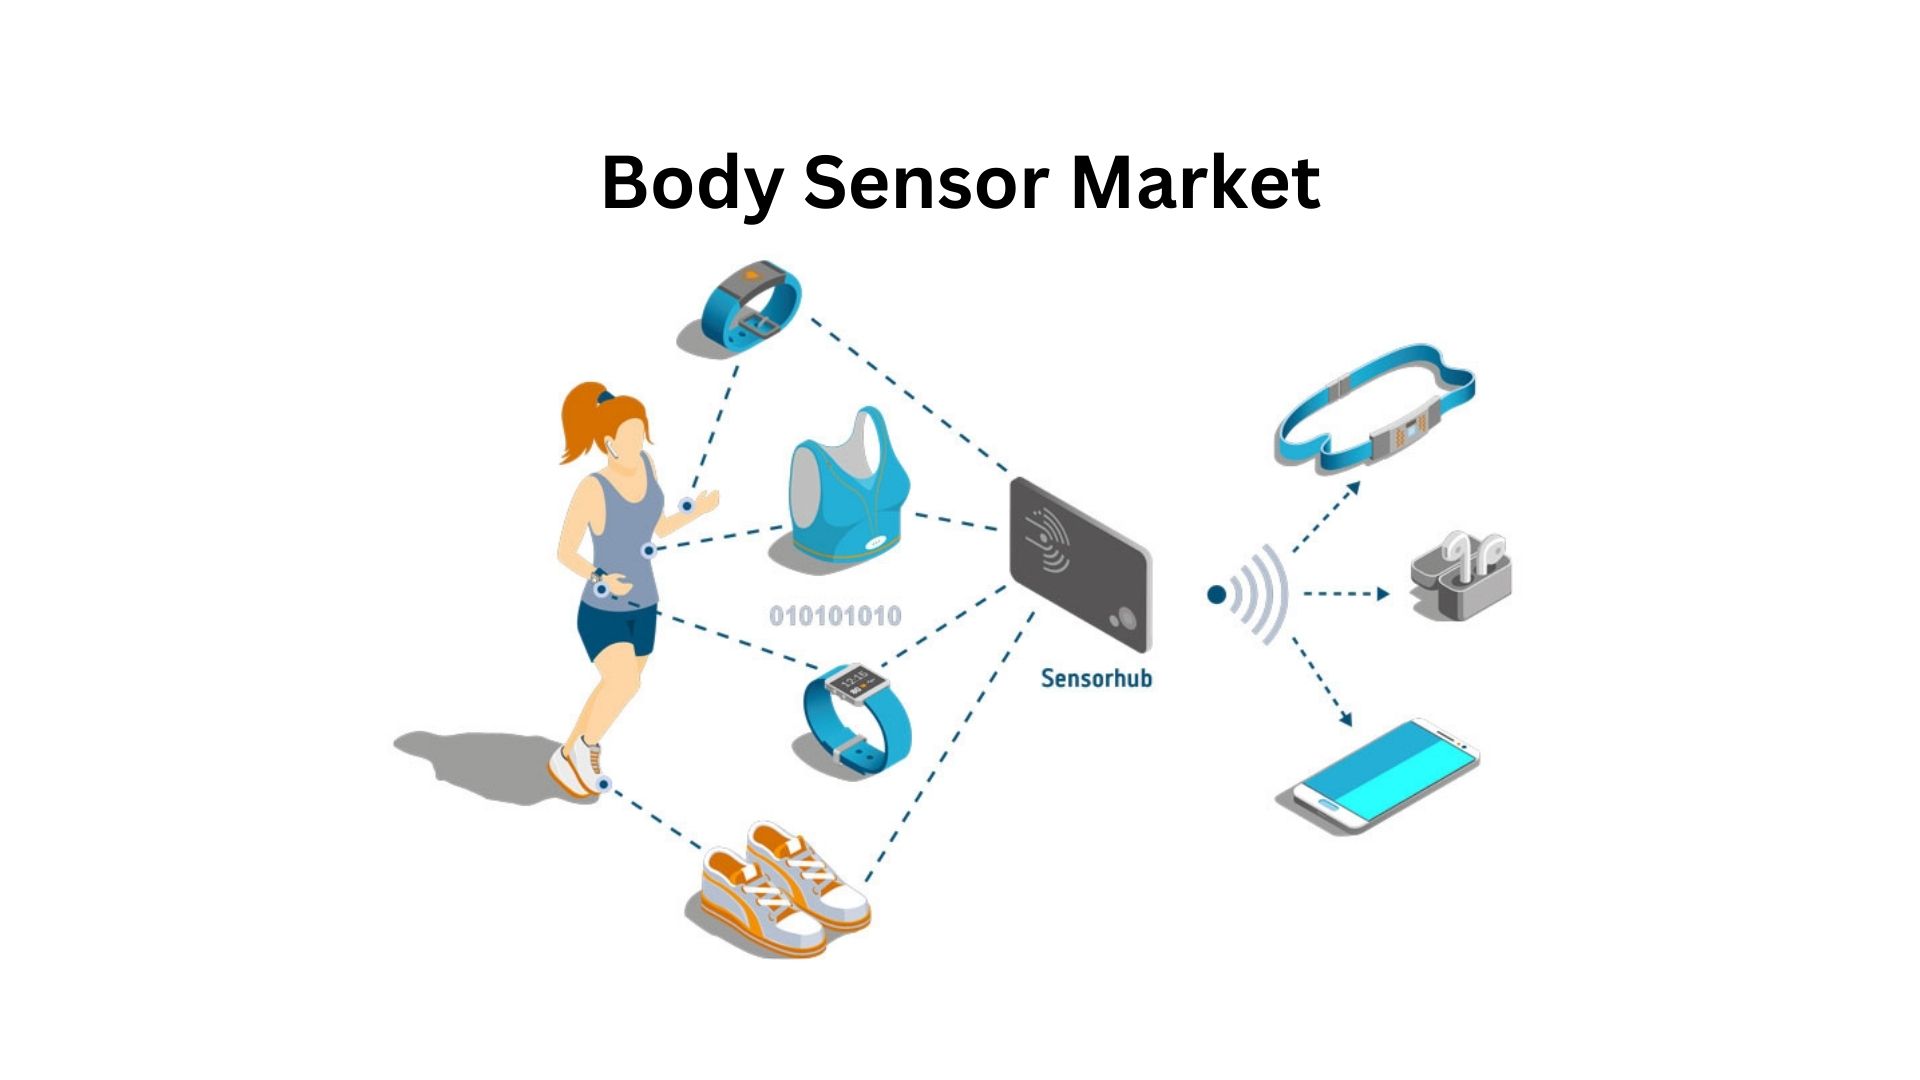 Body Sensor Market Size is valued at USD 27 billion in 2023, growing at a CAGR of 10.3%